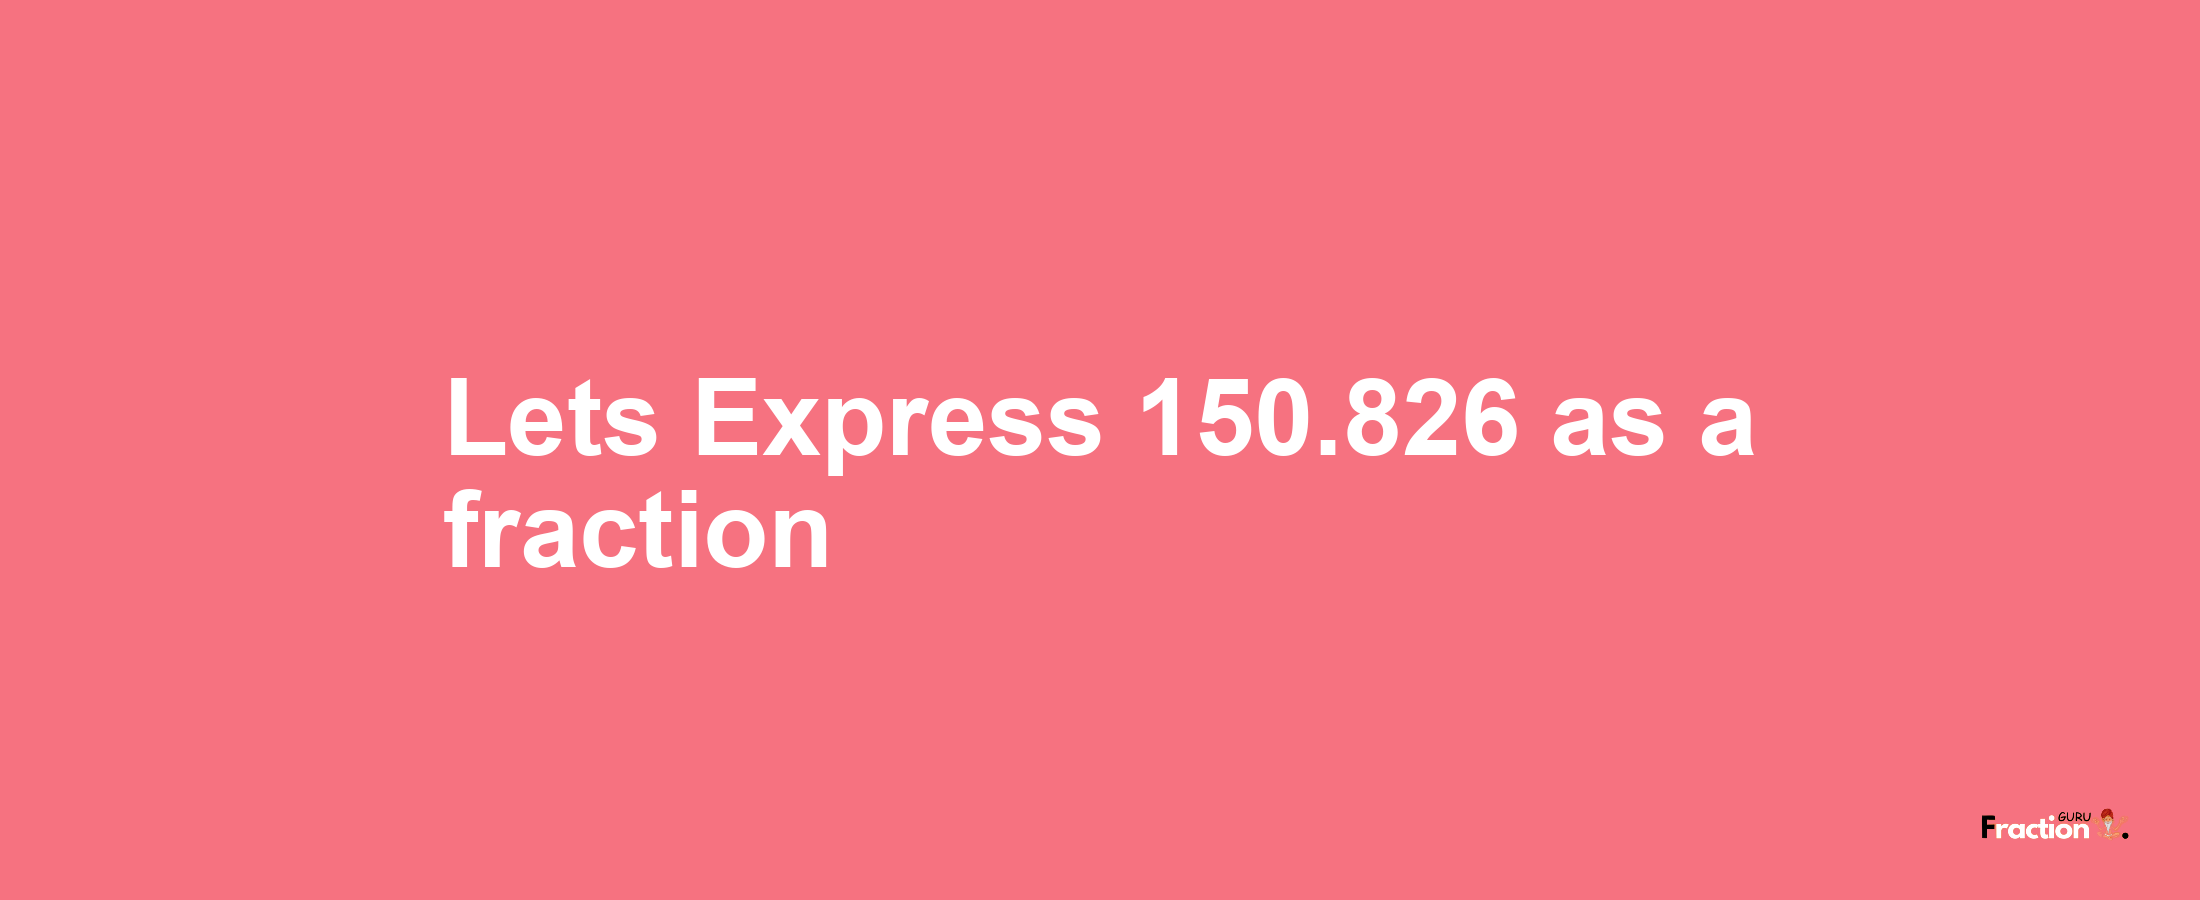 Lets Express 150.826 as afraction